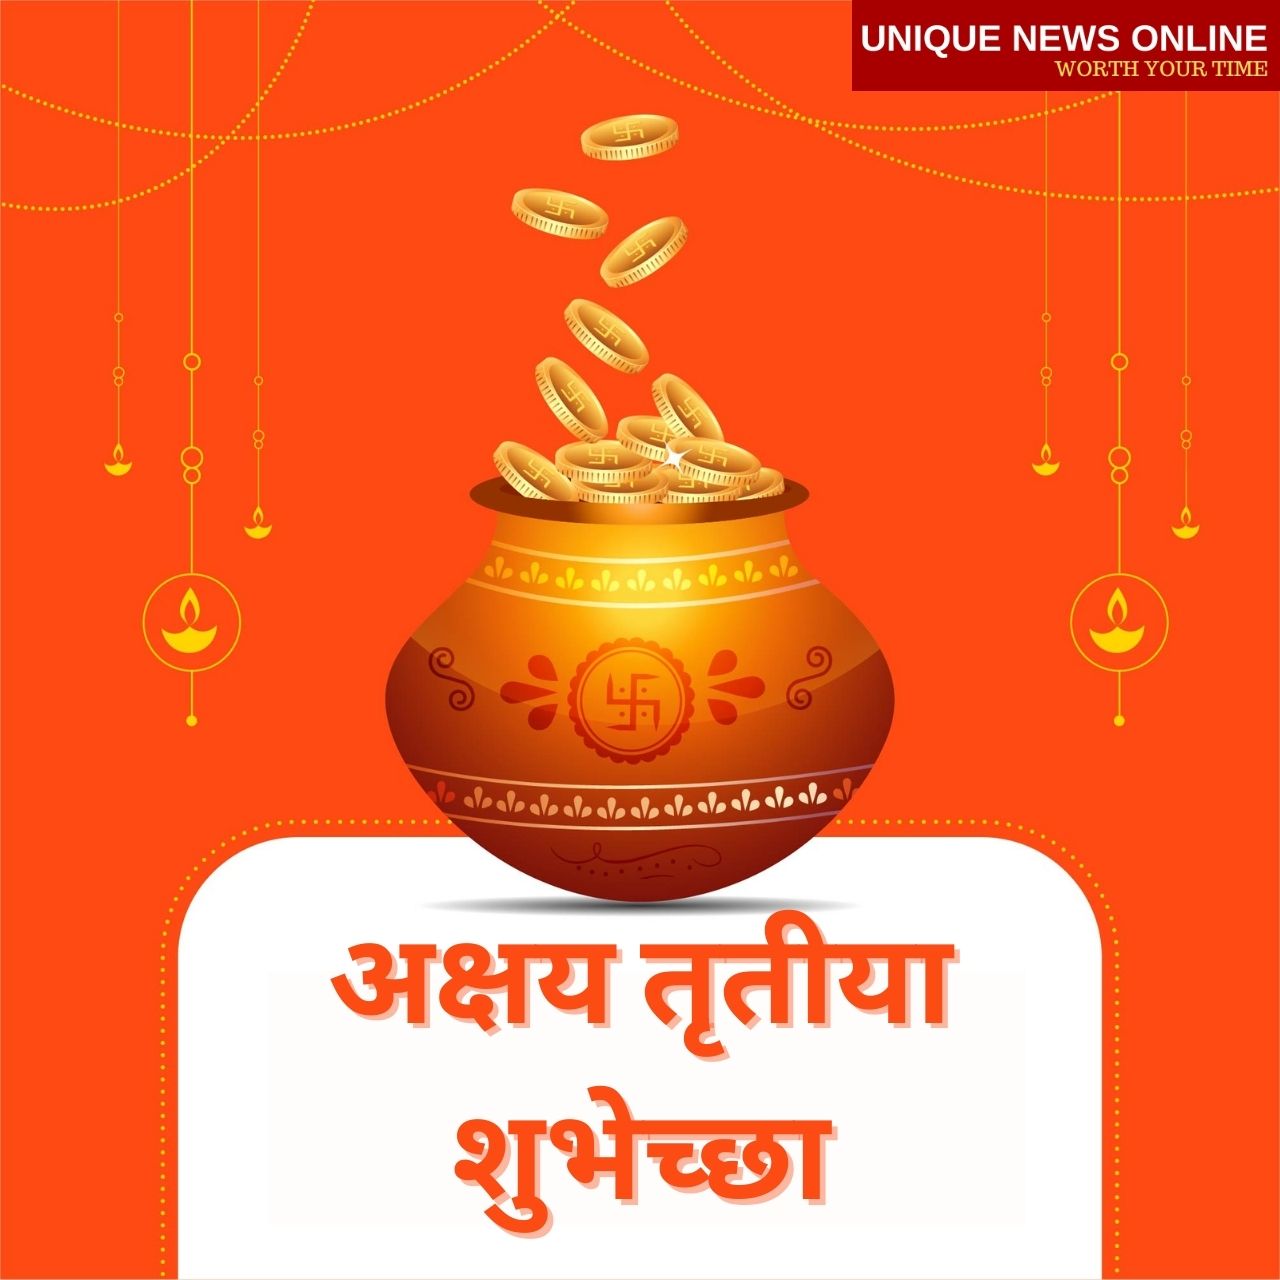 Akshaya Tritiya 2021 wishes in Marathi, Quotes, Images, messages, and greetings to share